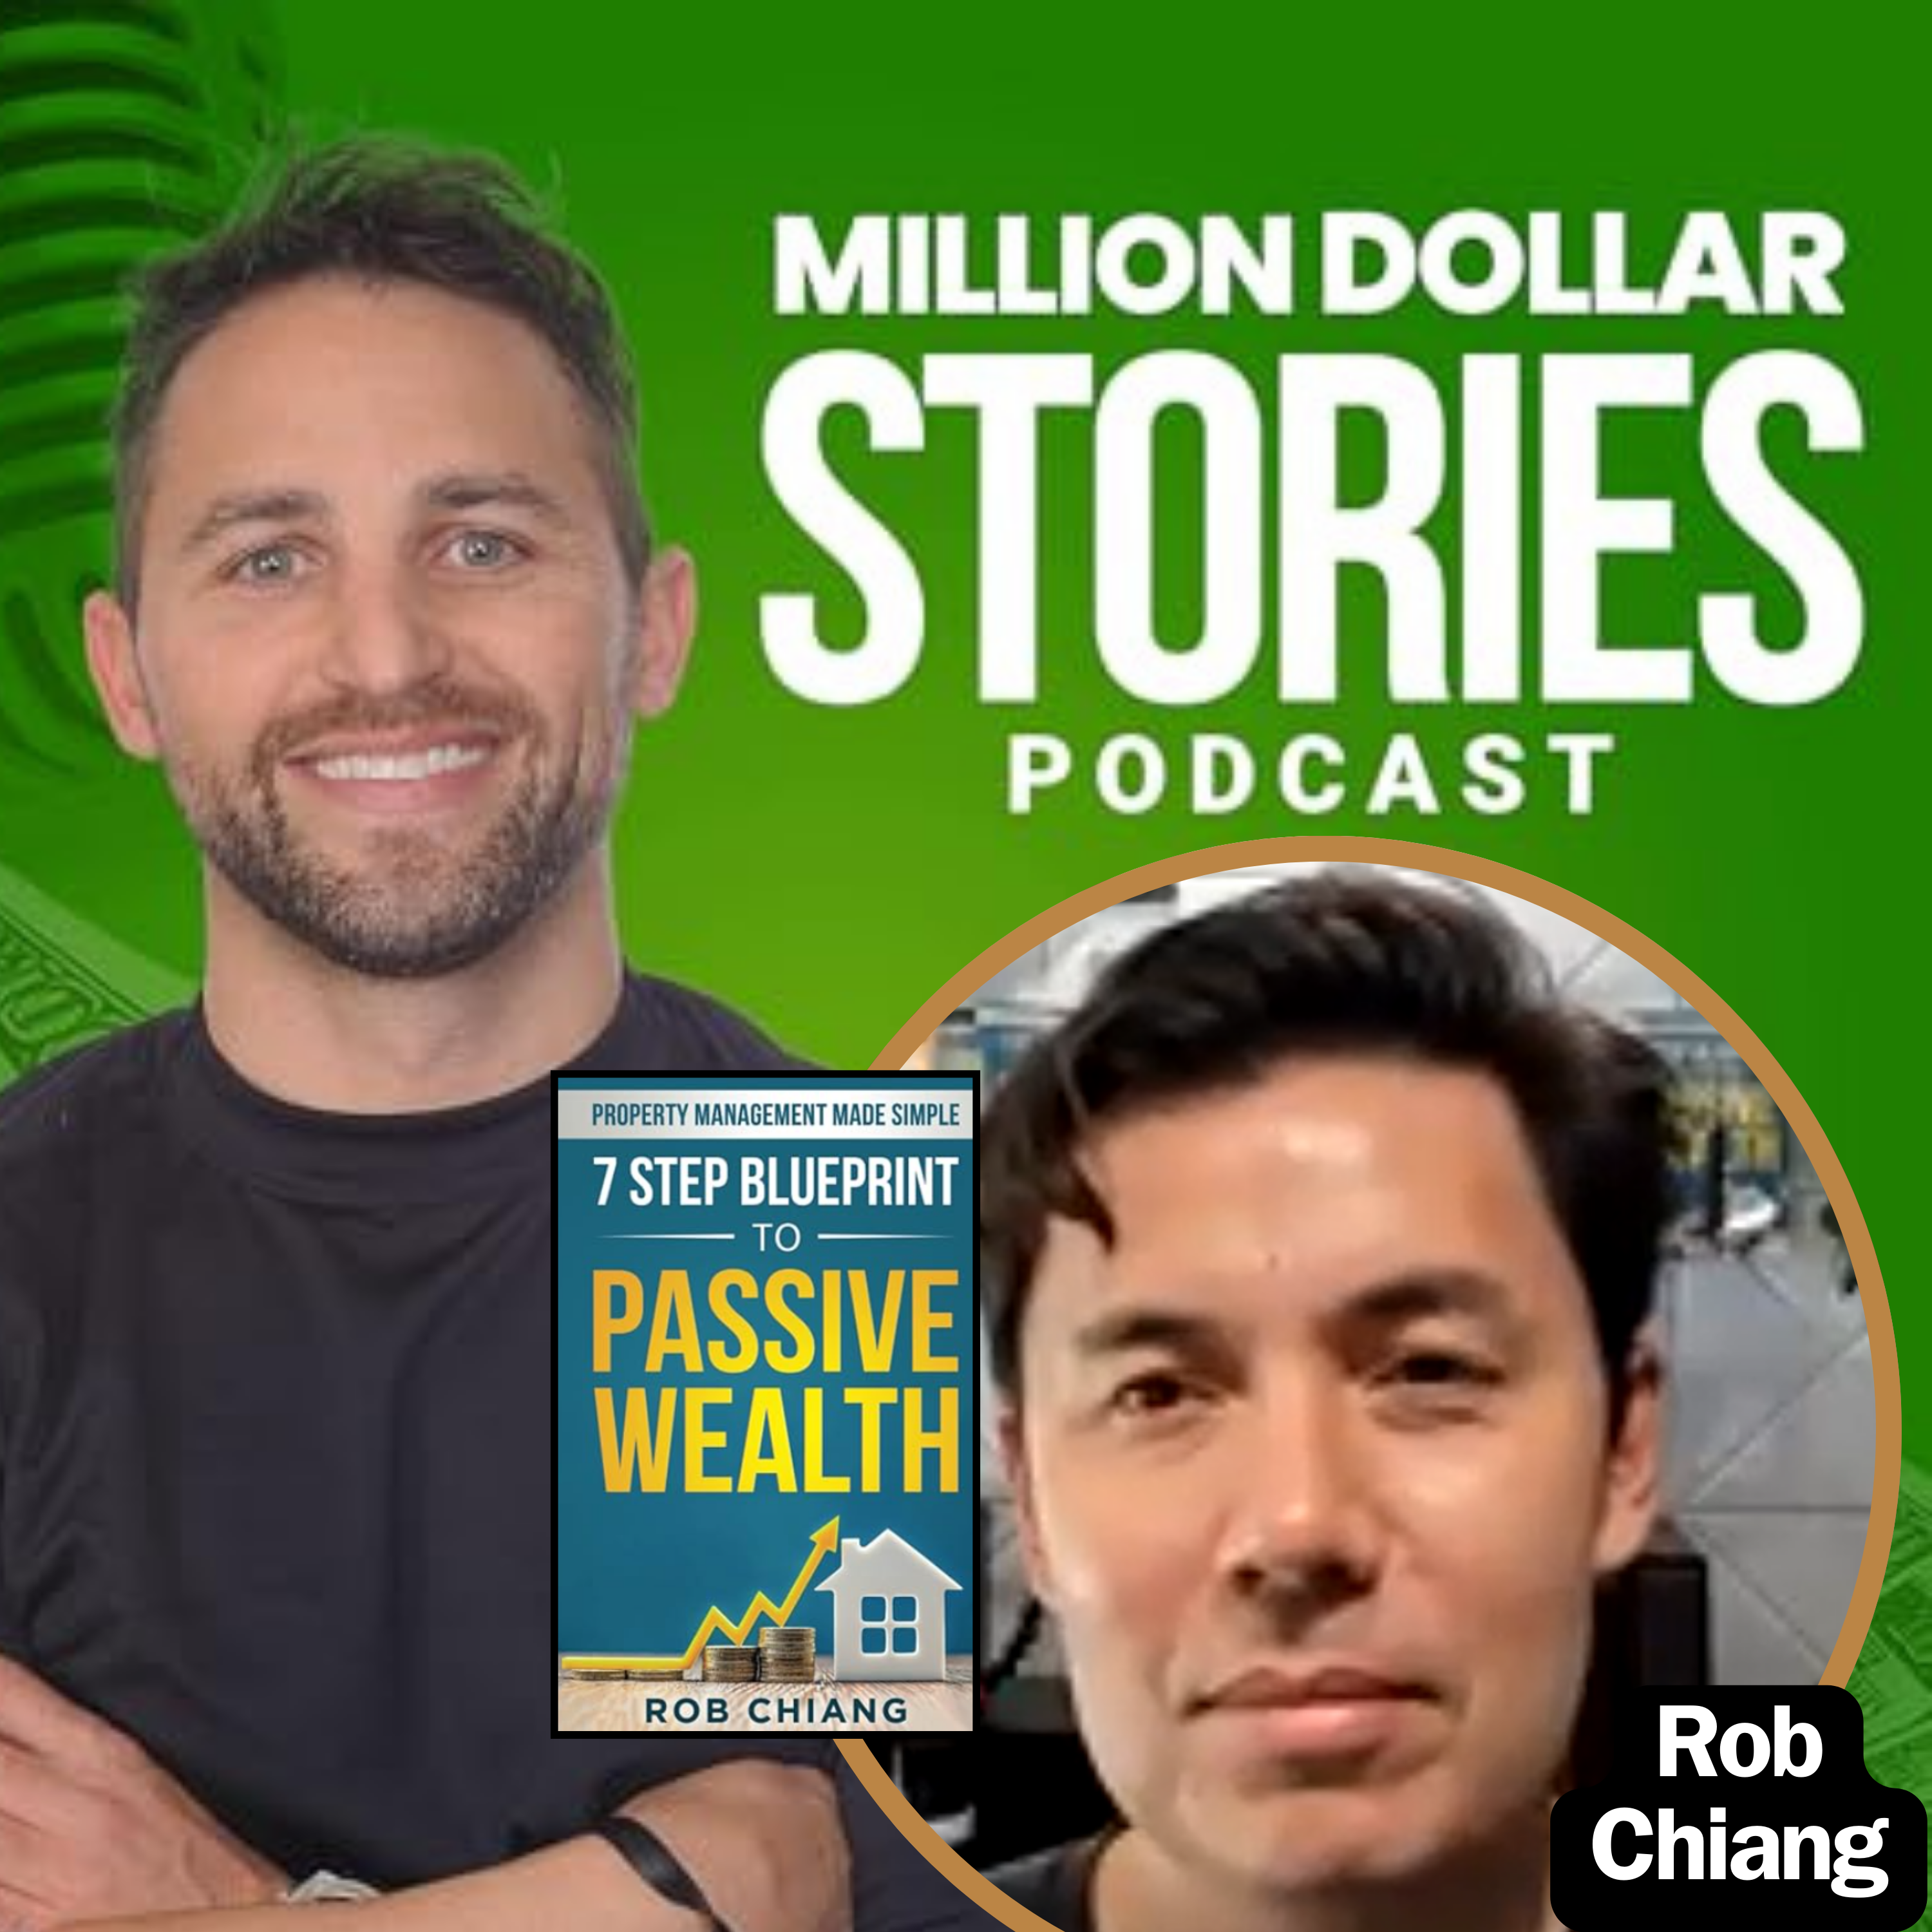 Rob Chiang – Author of “7 Step Blueprint to Passive Wealth: Property Management Made Simple”